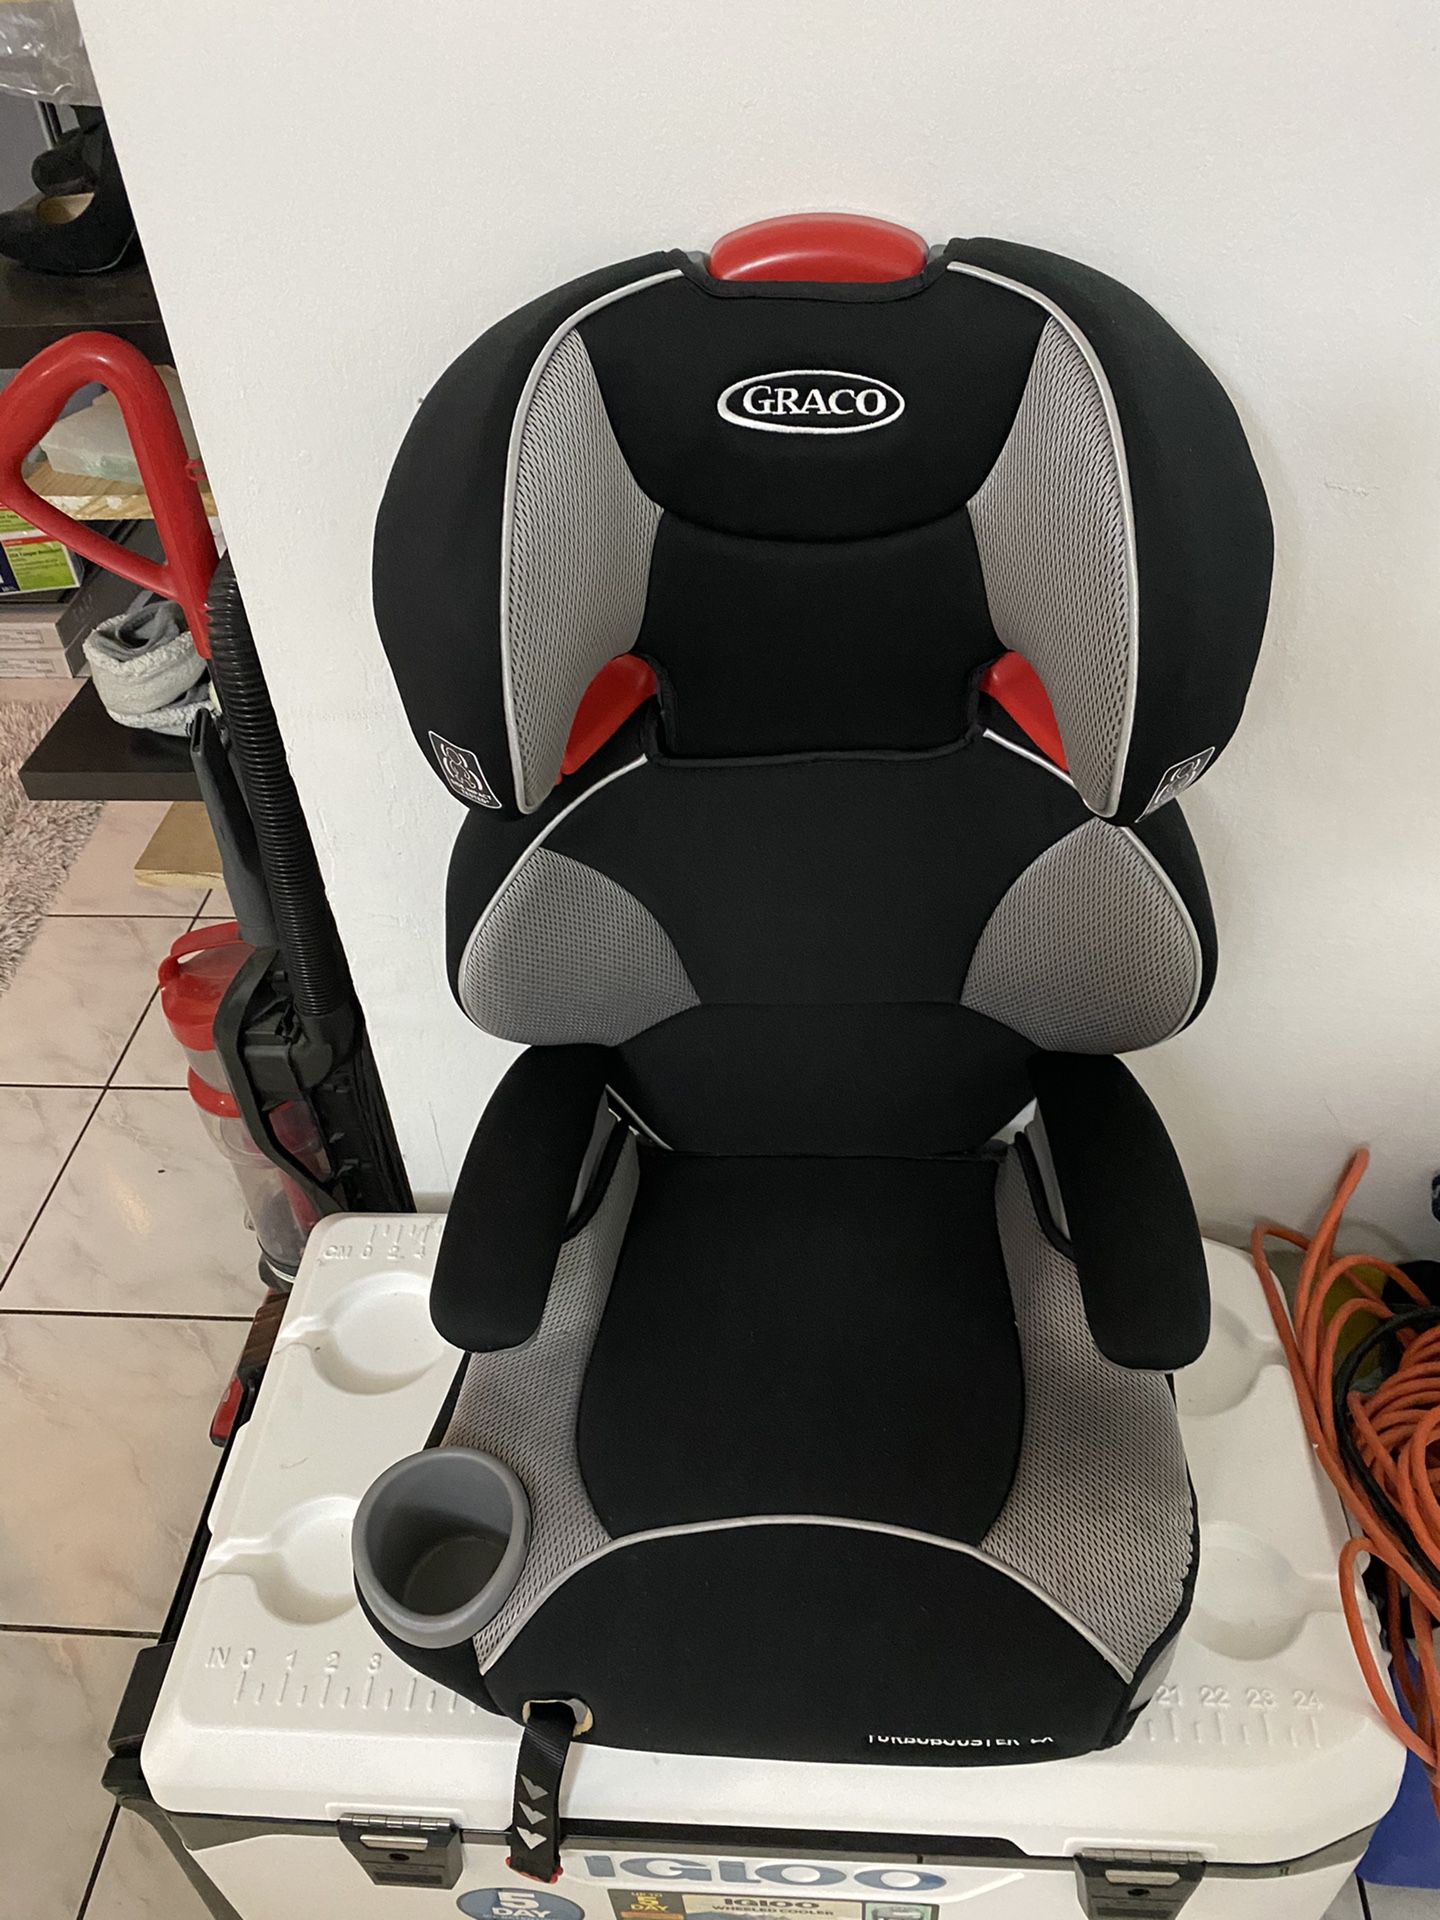 Brand new Graco Turbo Booster LX car seat